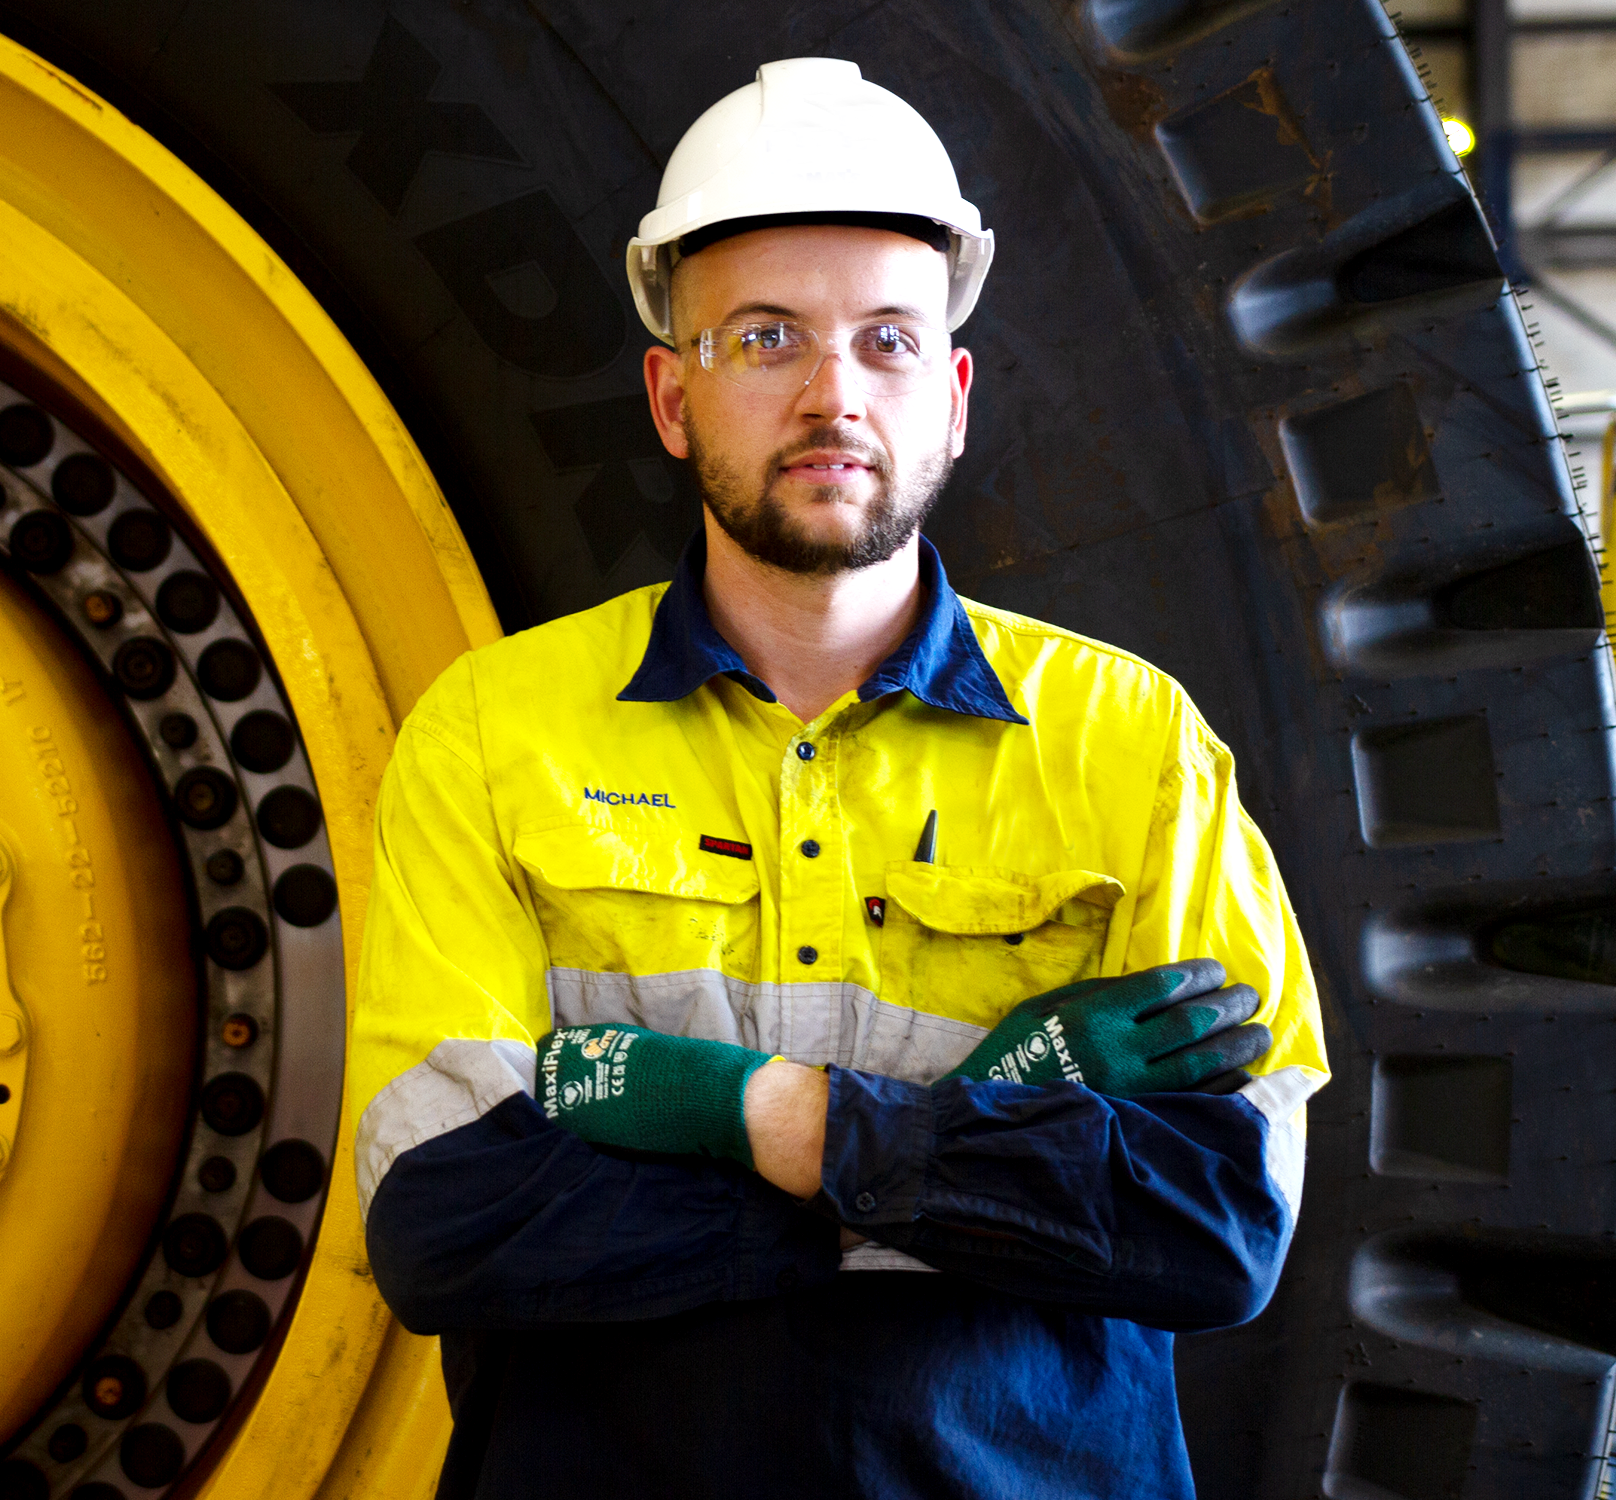 <em>Michael</em> - Hired, upskilled and successfully working as a Heavy Mobile Plant Technician at Komatsu Mining Corp 1